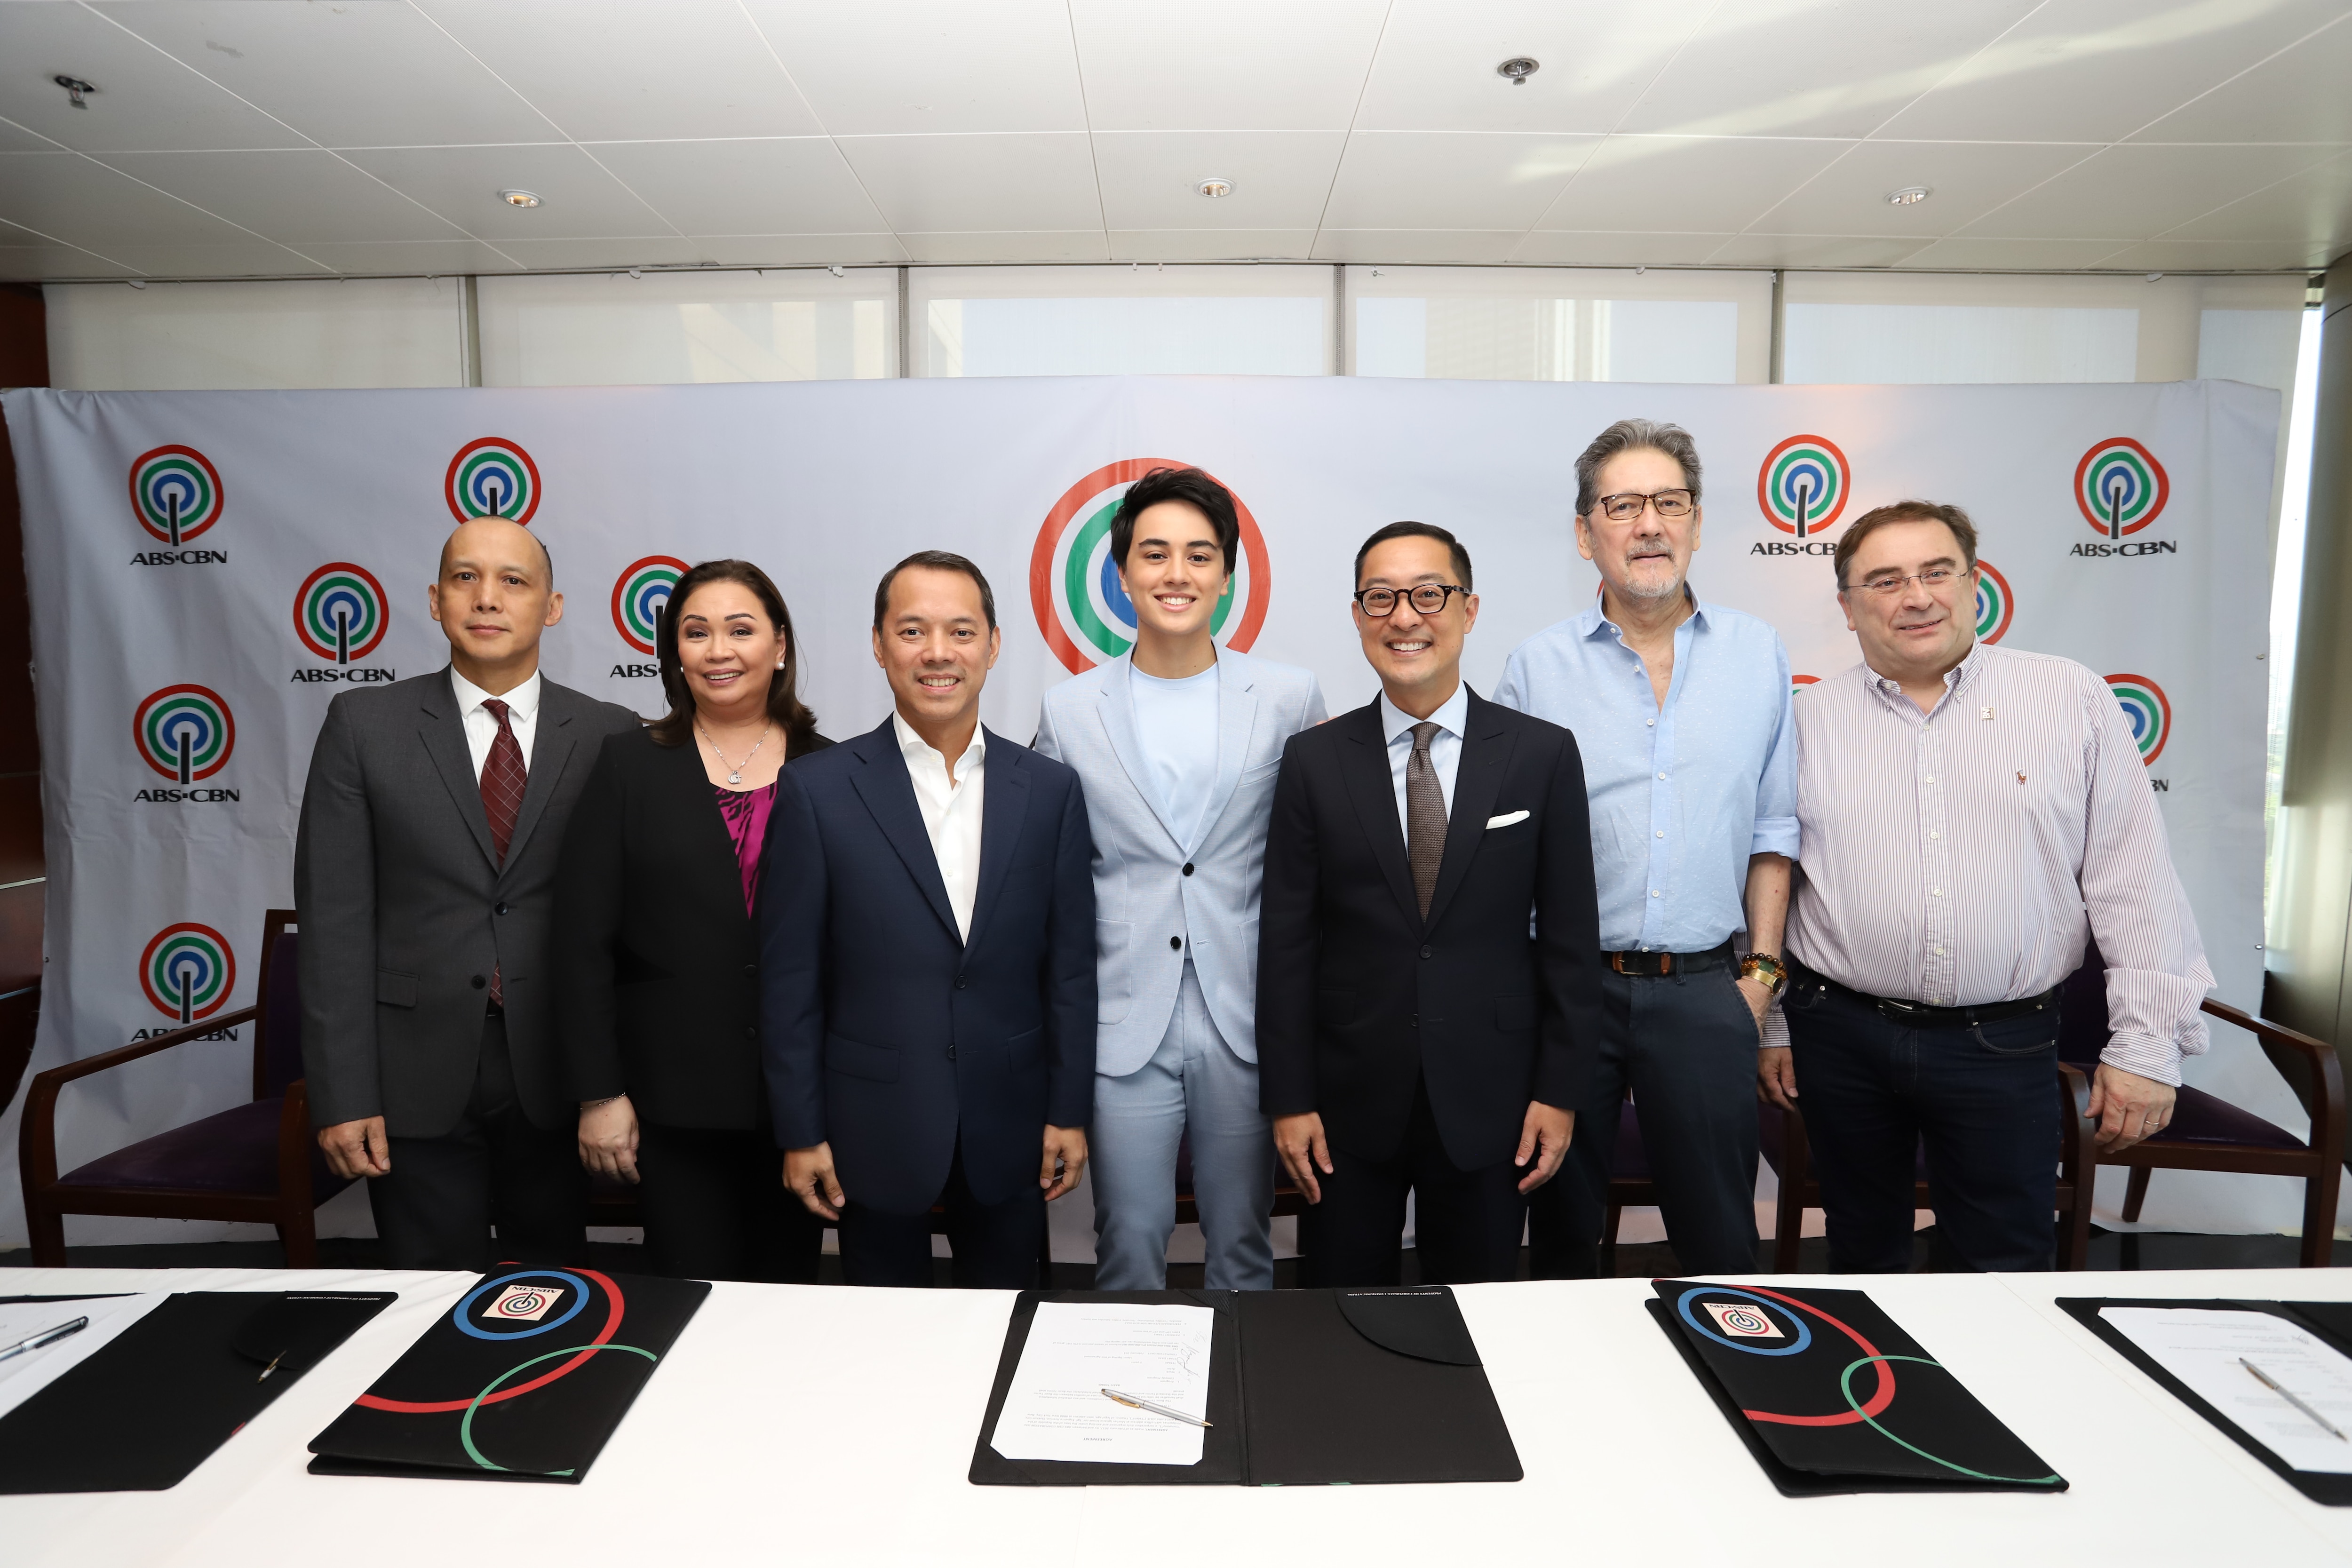 Edward Barber with ABS CBN executives